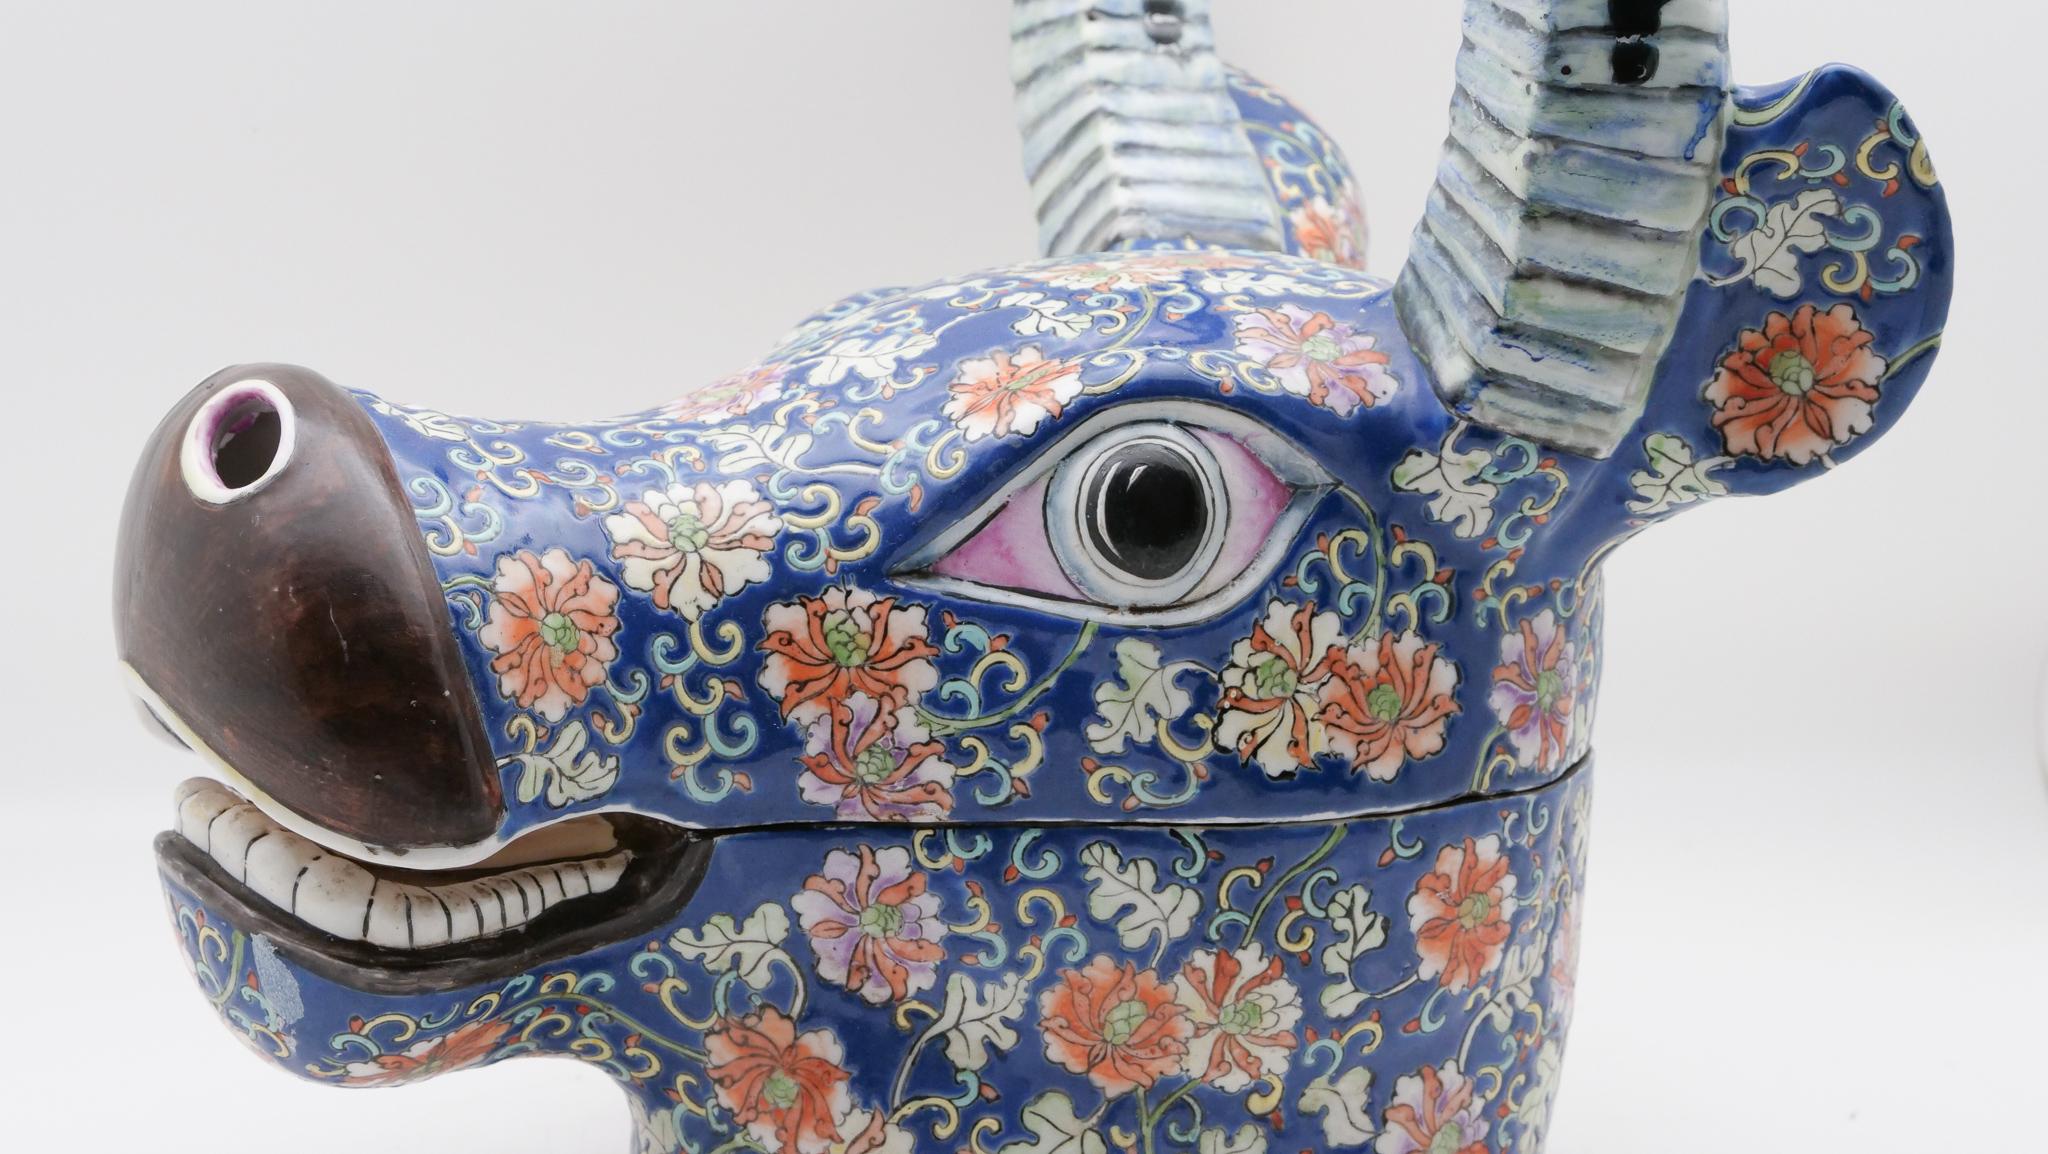 Painted Chinese ceramic tureen in the form of the head of a water buffalo.